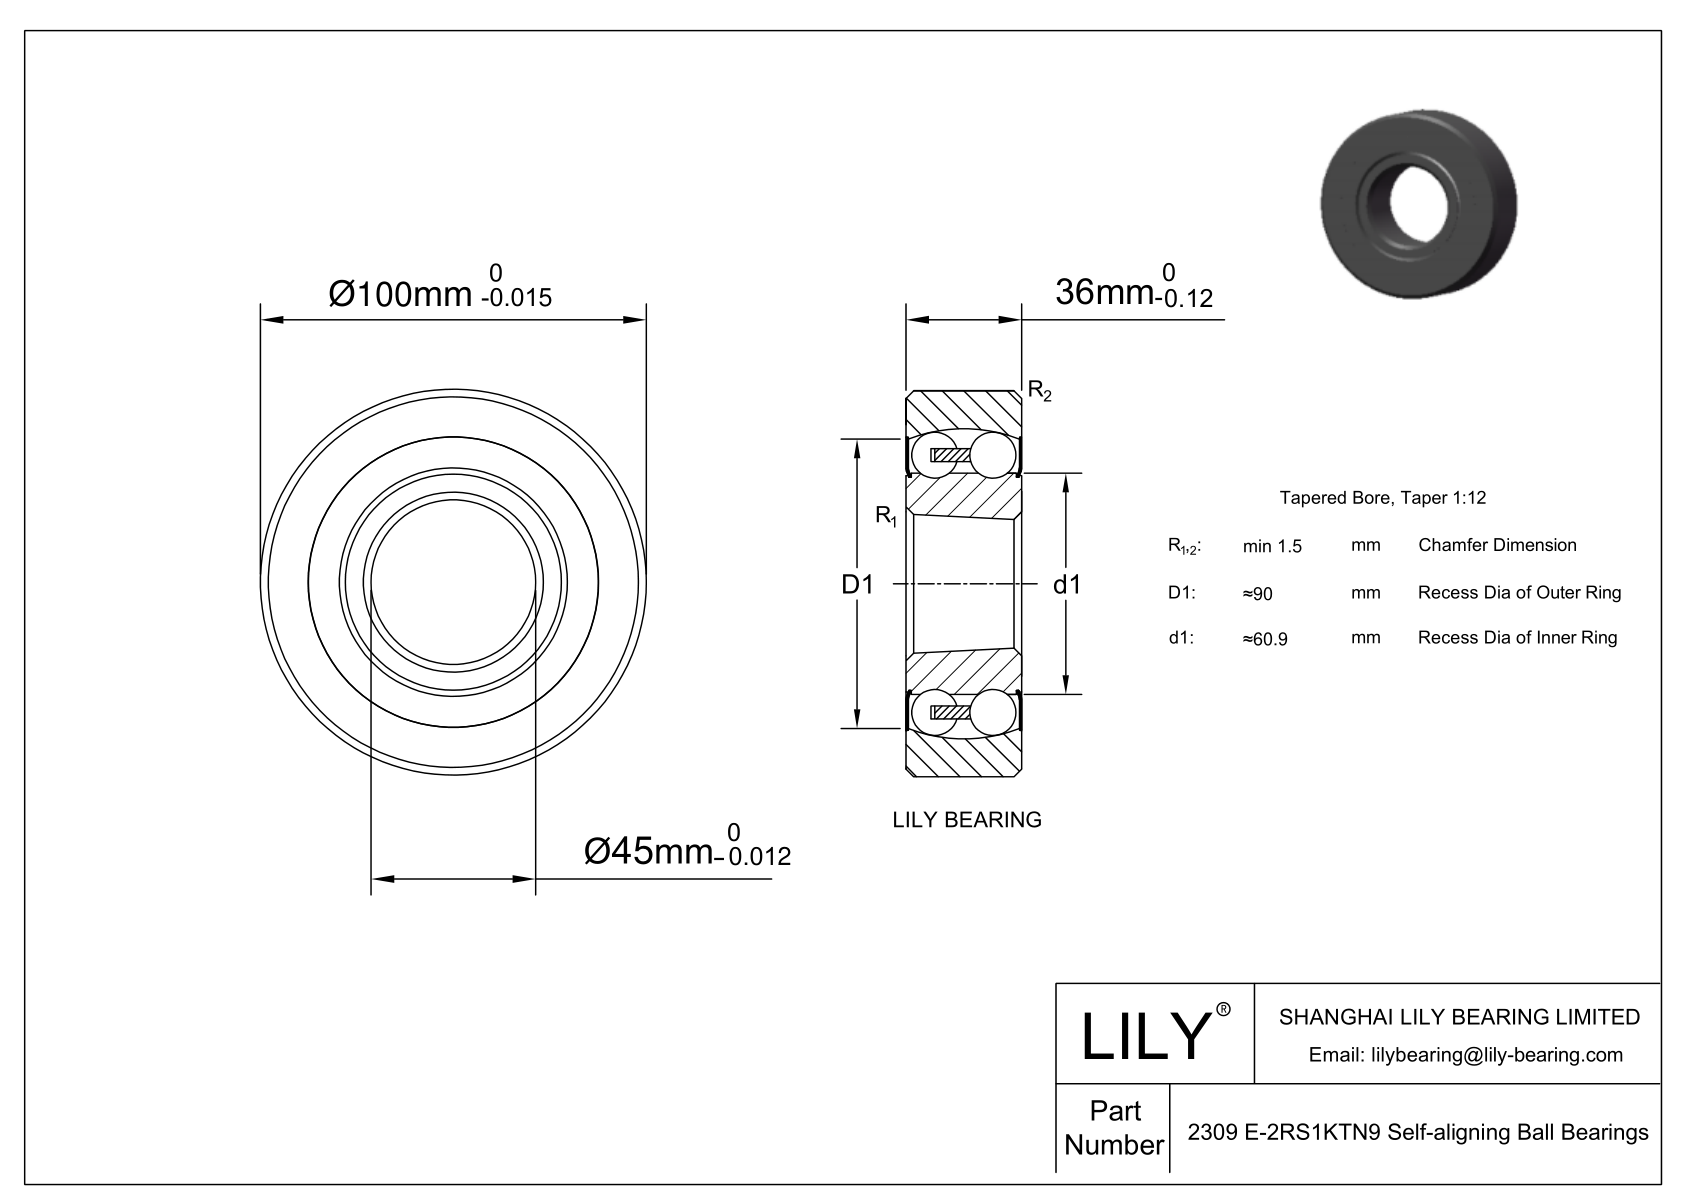 CE2309 E-SCPP Silicon Carbide Self Aligning Ball Bearings cad drawing